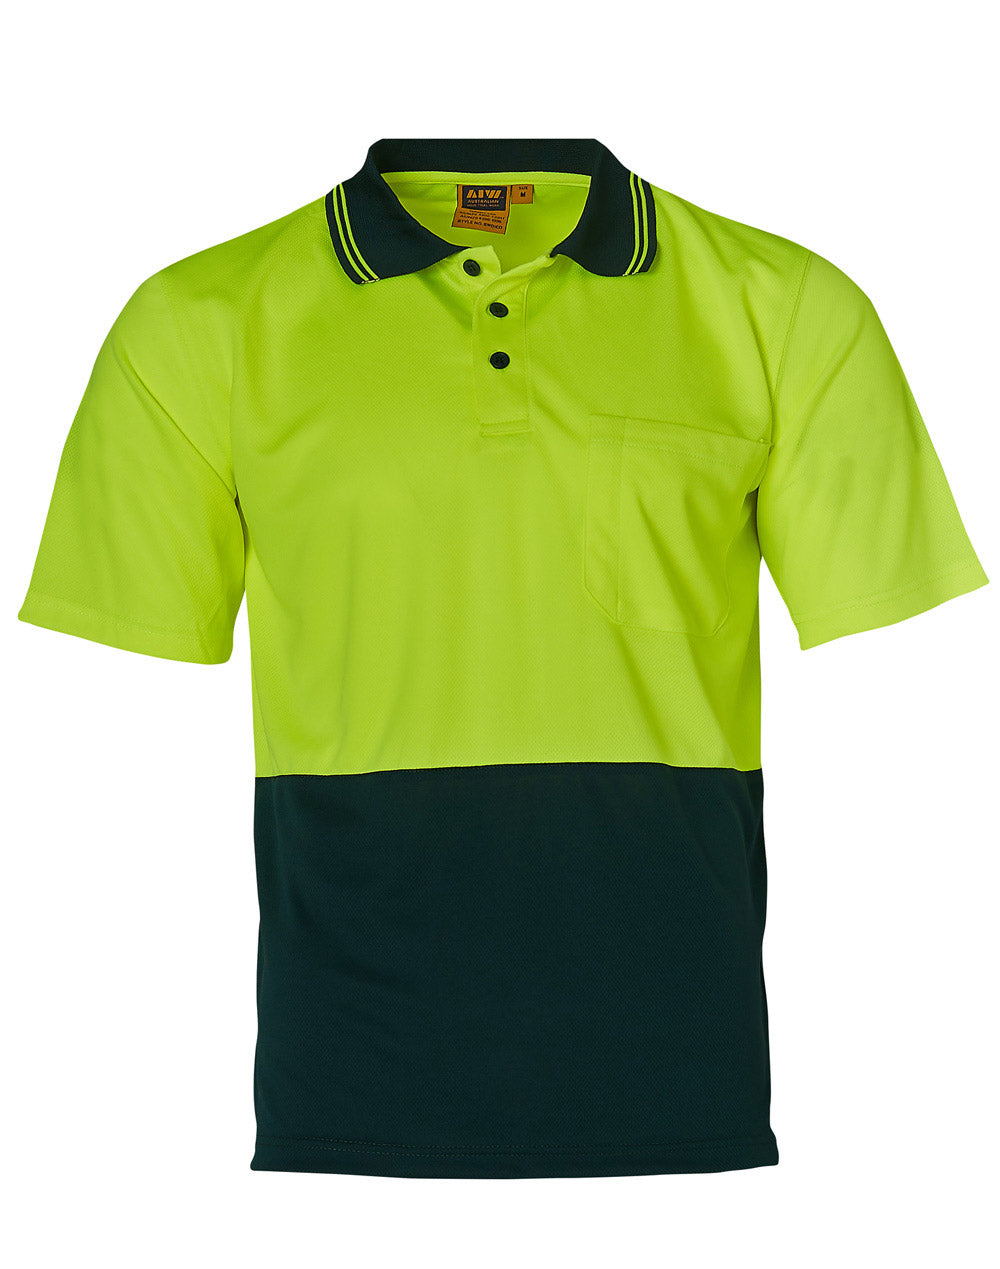 Hivis Short Sleeve Truedry Polo Shirt - made by AIW